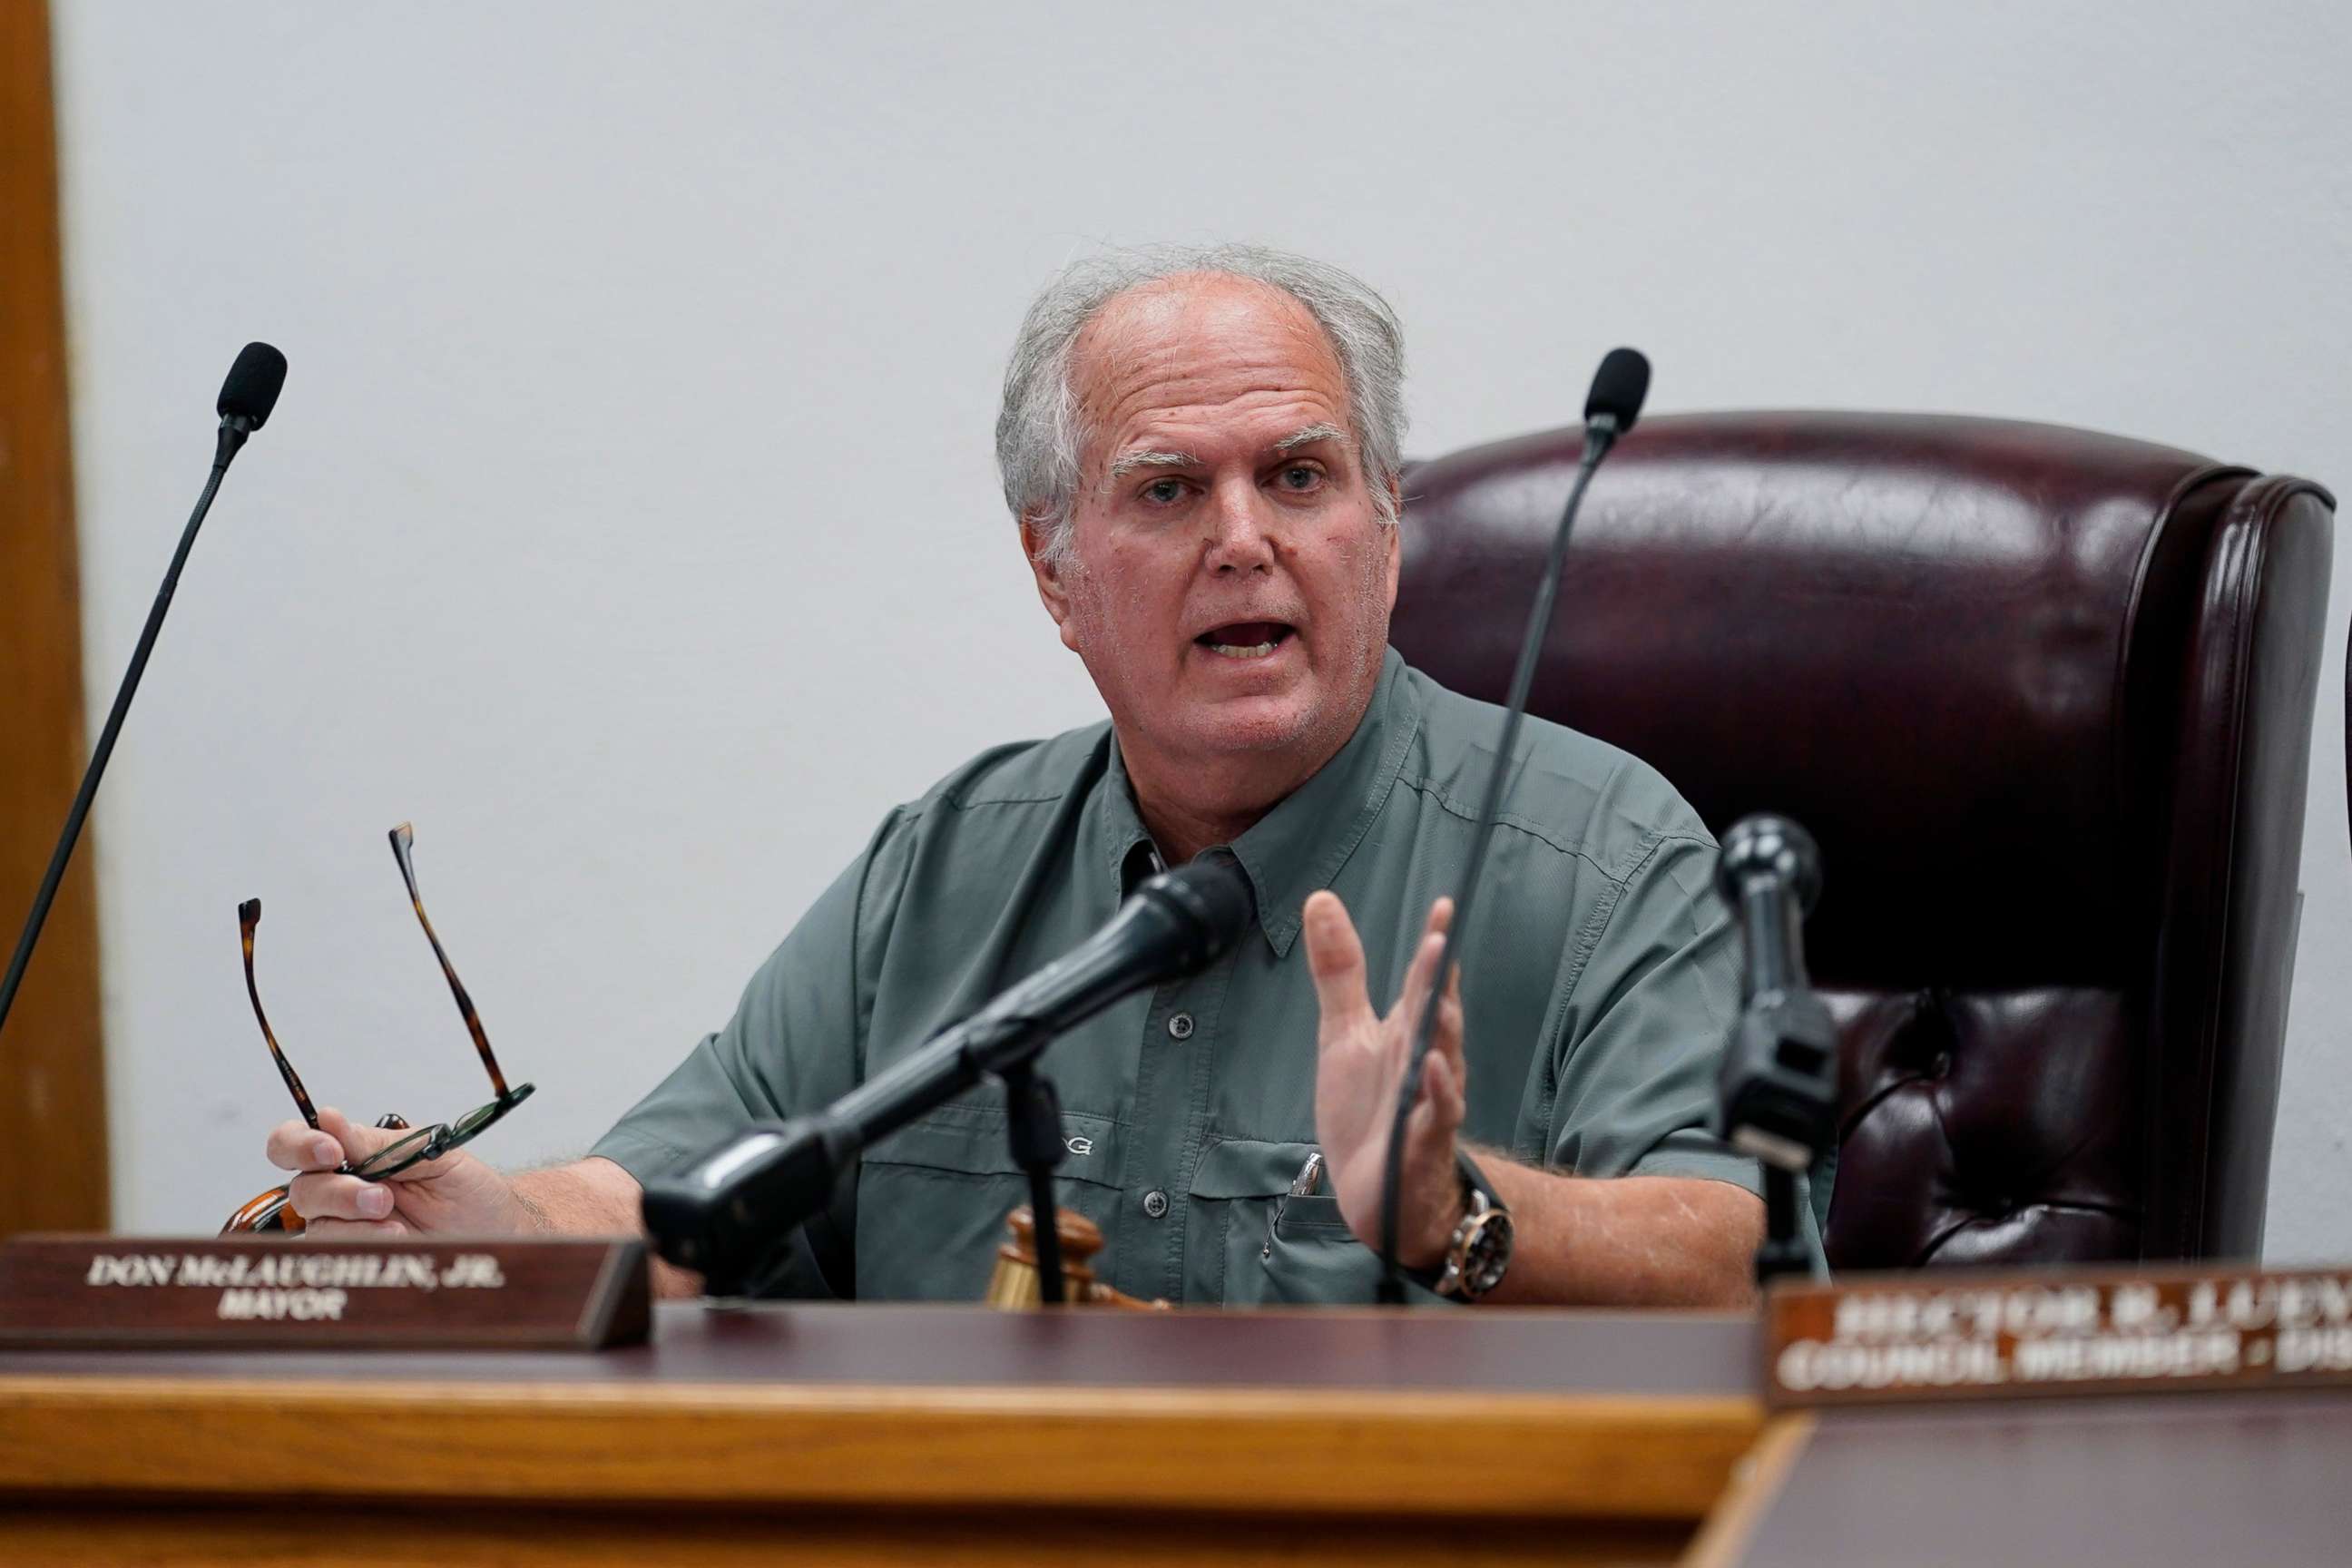 PHOTO: Uvalde Mayor Don McLaughlin, Jr., speaks during a special emergency city council meeting, on June 7, 2022, in Uvalde, Texas.